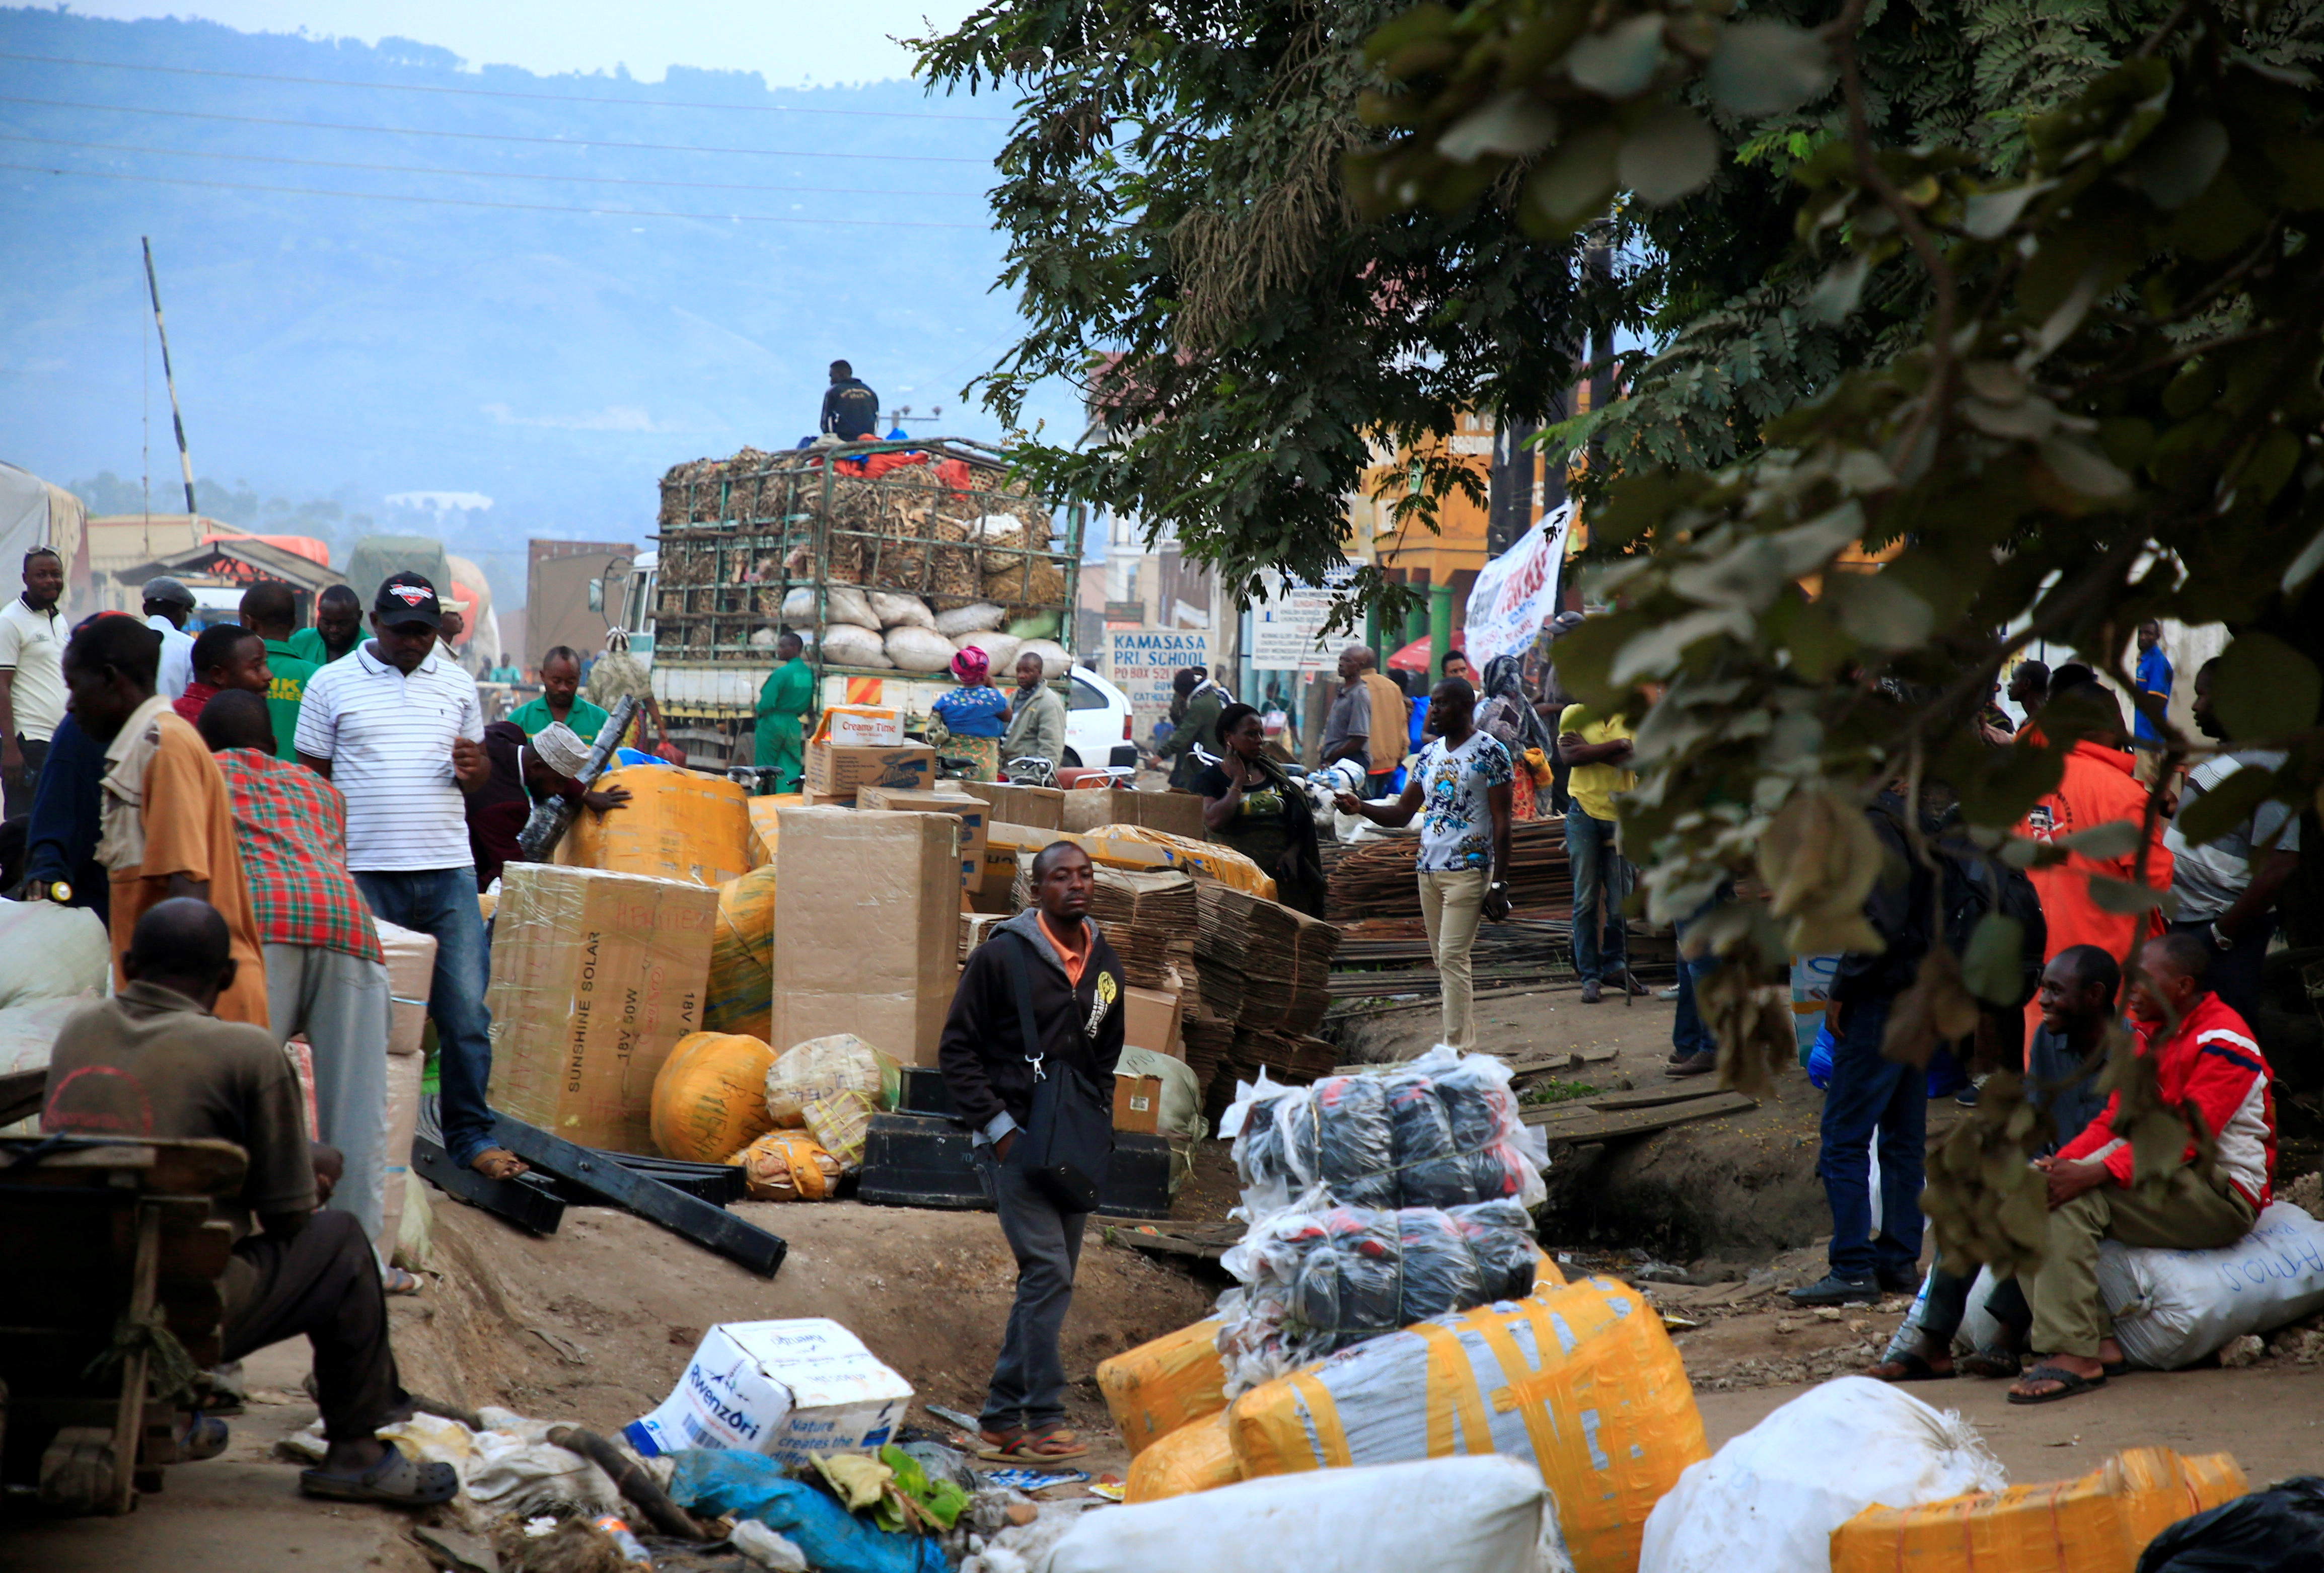 Ugandan business people are seen at a market with their merchandises for sale at Mpondwe border that separates Uganda and the Democratic Republic of Congo in Mpondwe